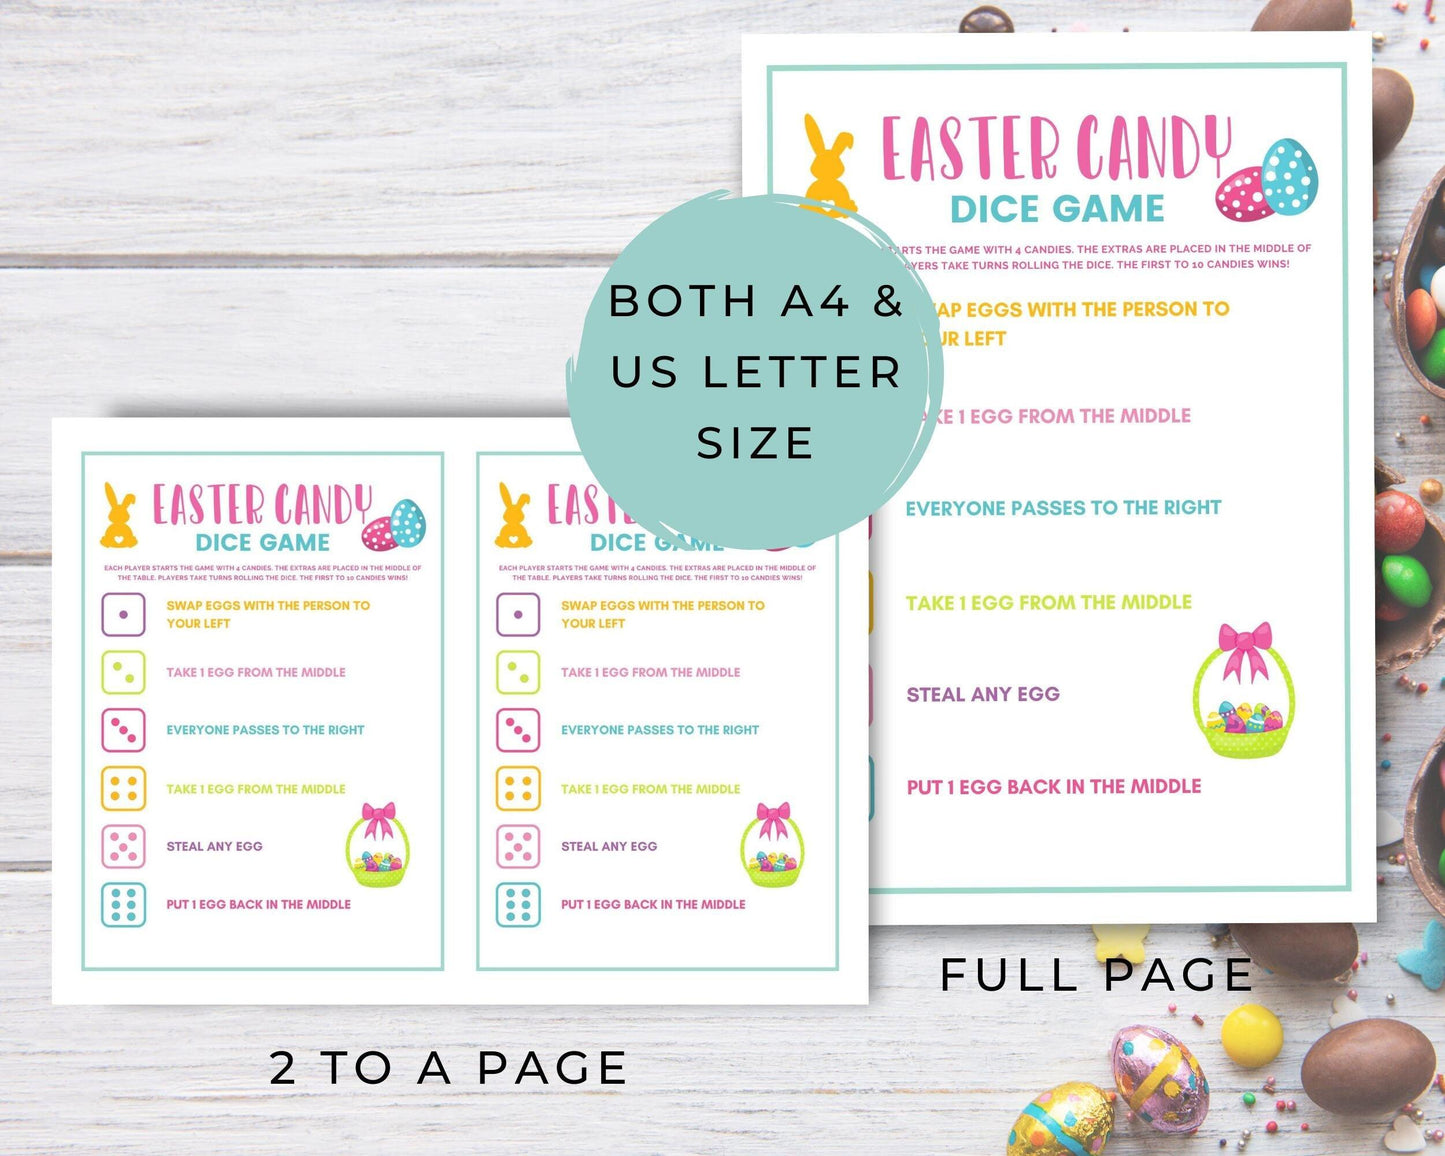 Easter Candy Dice Game - Simplify Create Inspire